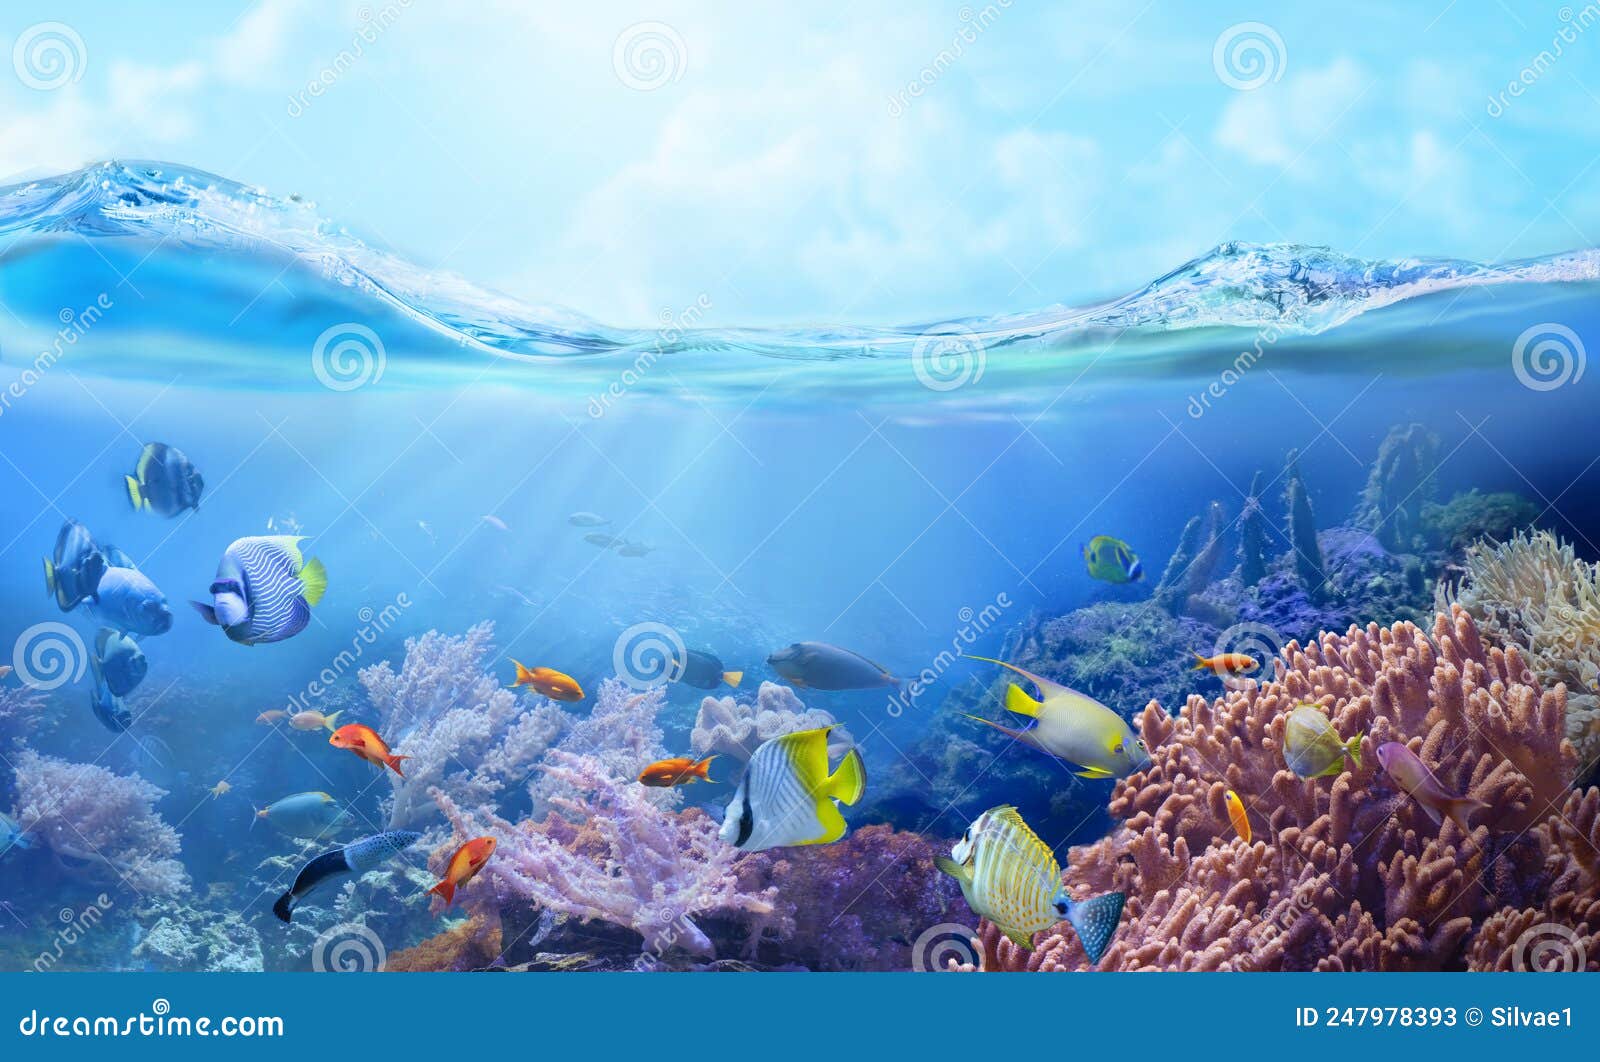 Colorful Animals in a Coral Reef. Life in Tropical Waters. Stock Image ...